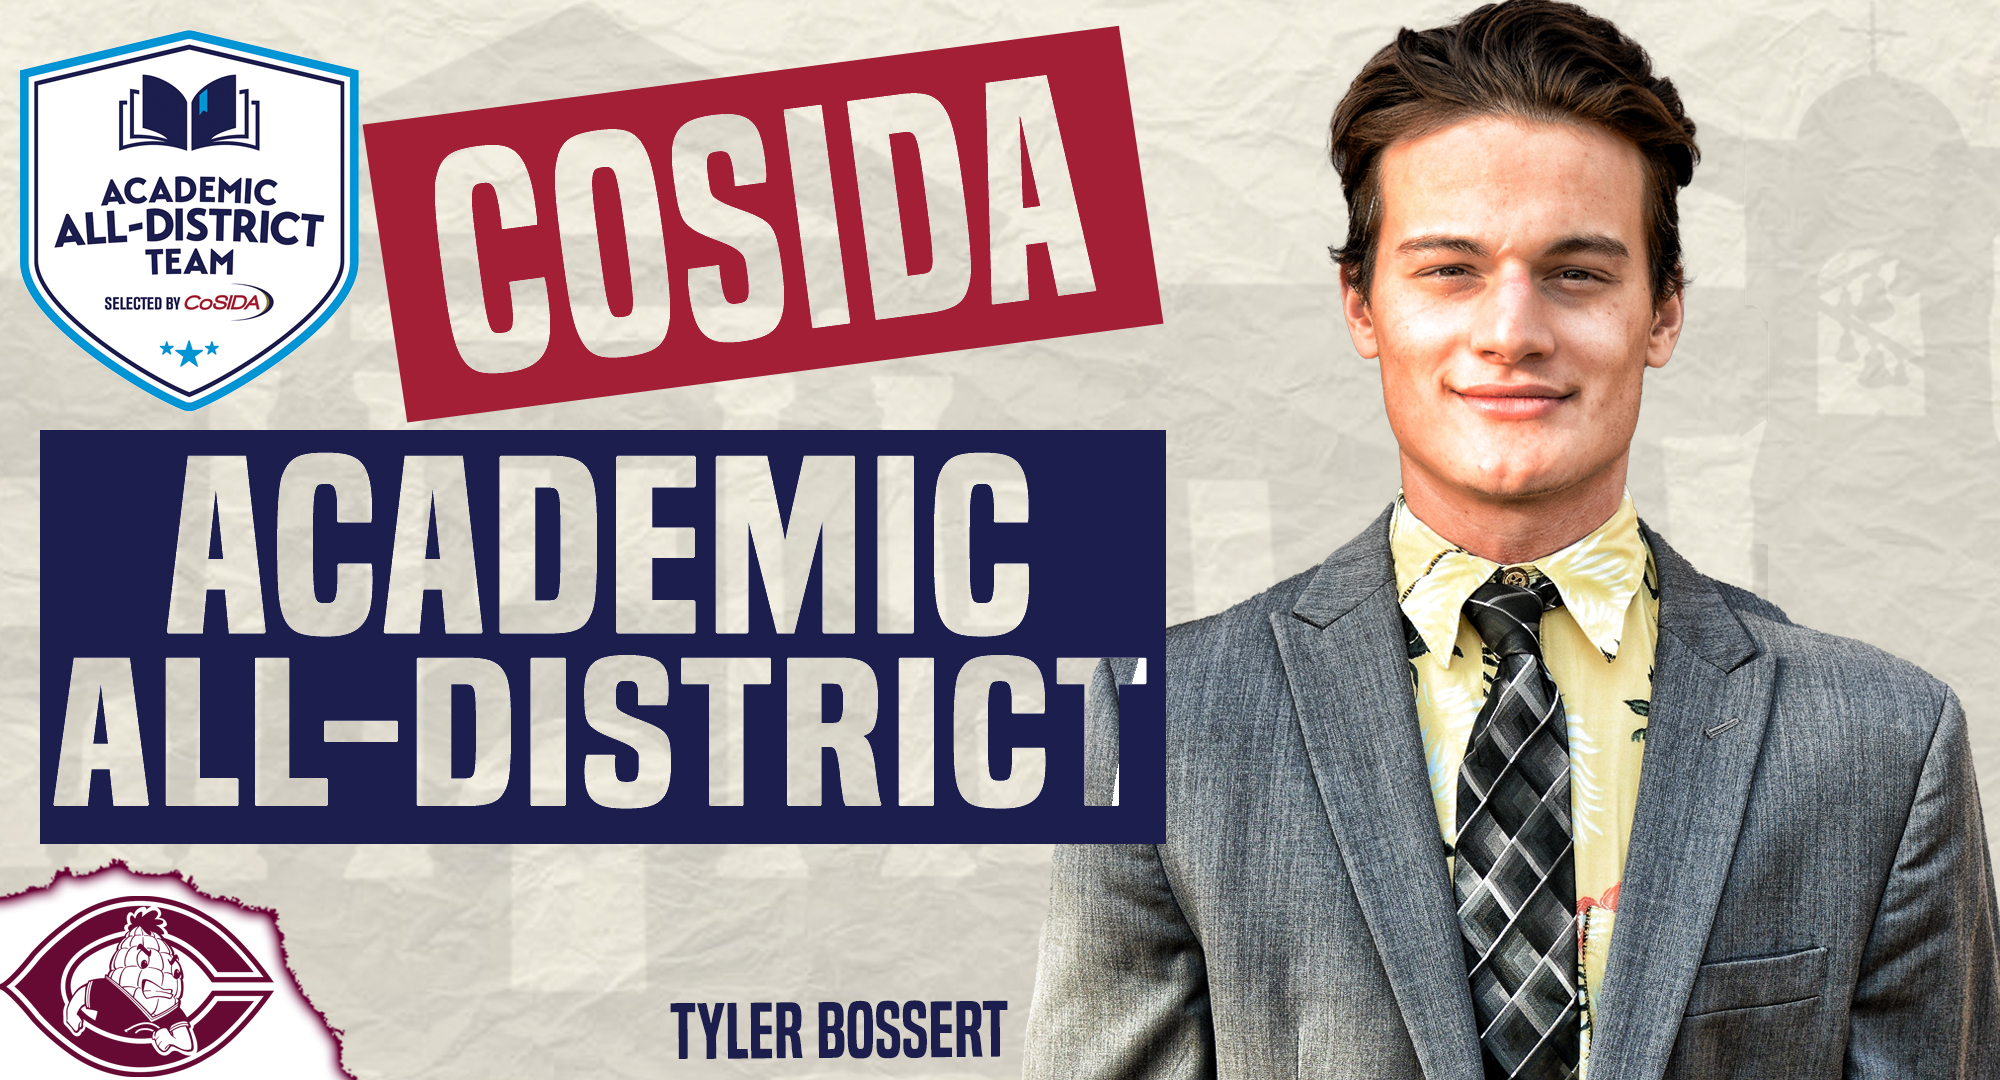 Concordia senior Tyler Bossert was named to the CoSIDA  Academic All-District At-Large Team. He has a 3.89 GPA while majoring in Finance.